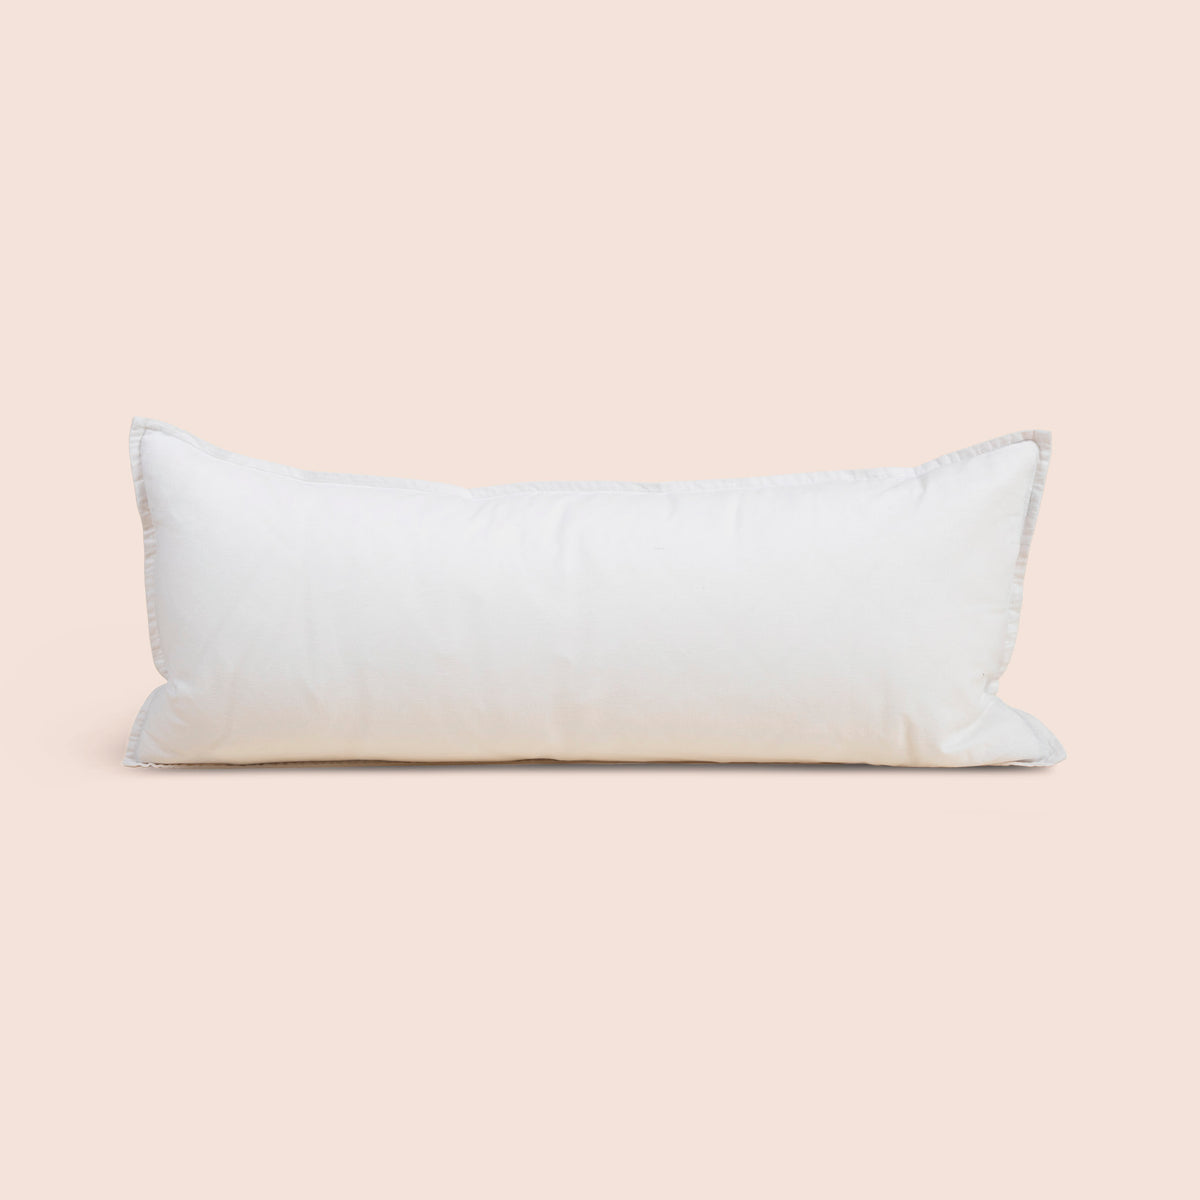 Image of White Relaxed Hemp Lumbar Pillow Cover on a lumbar pillow with a light pink background